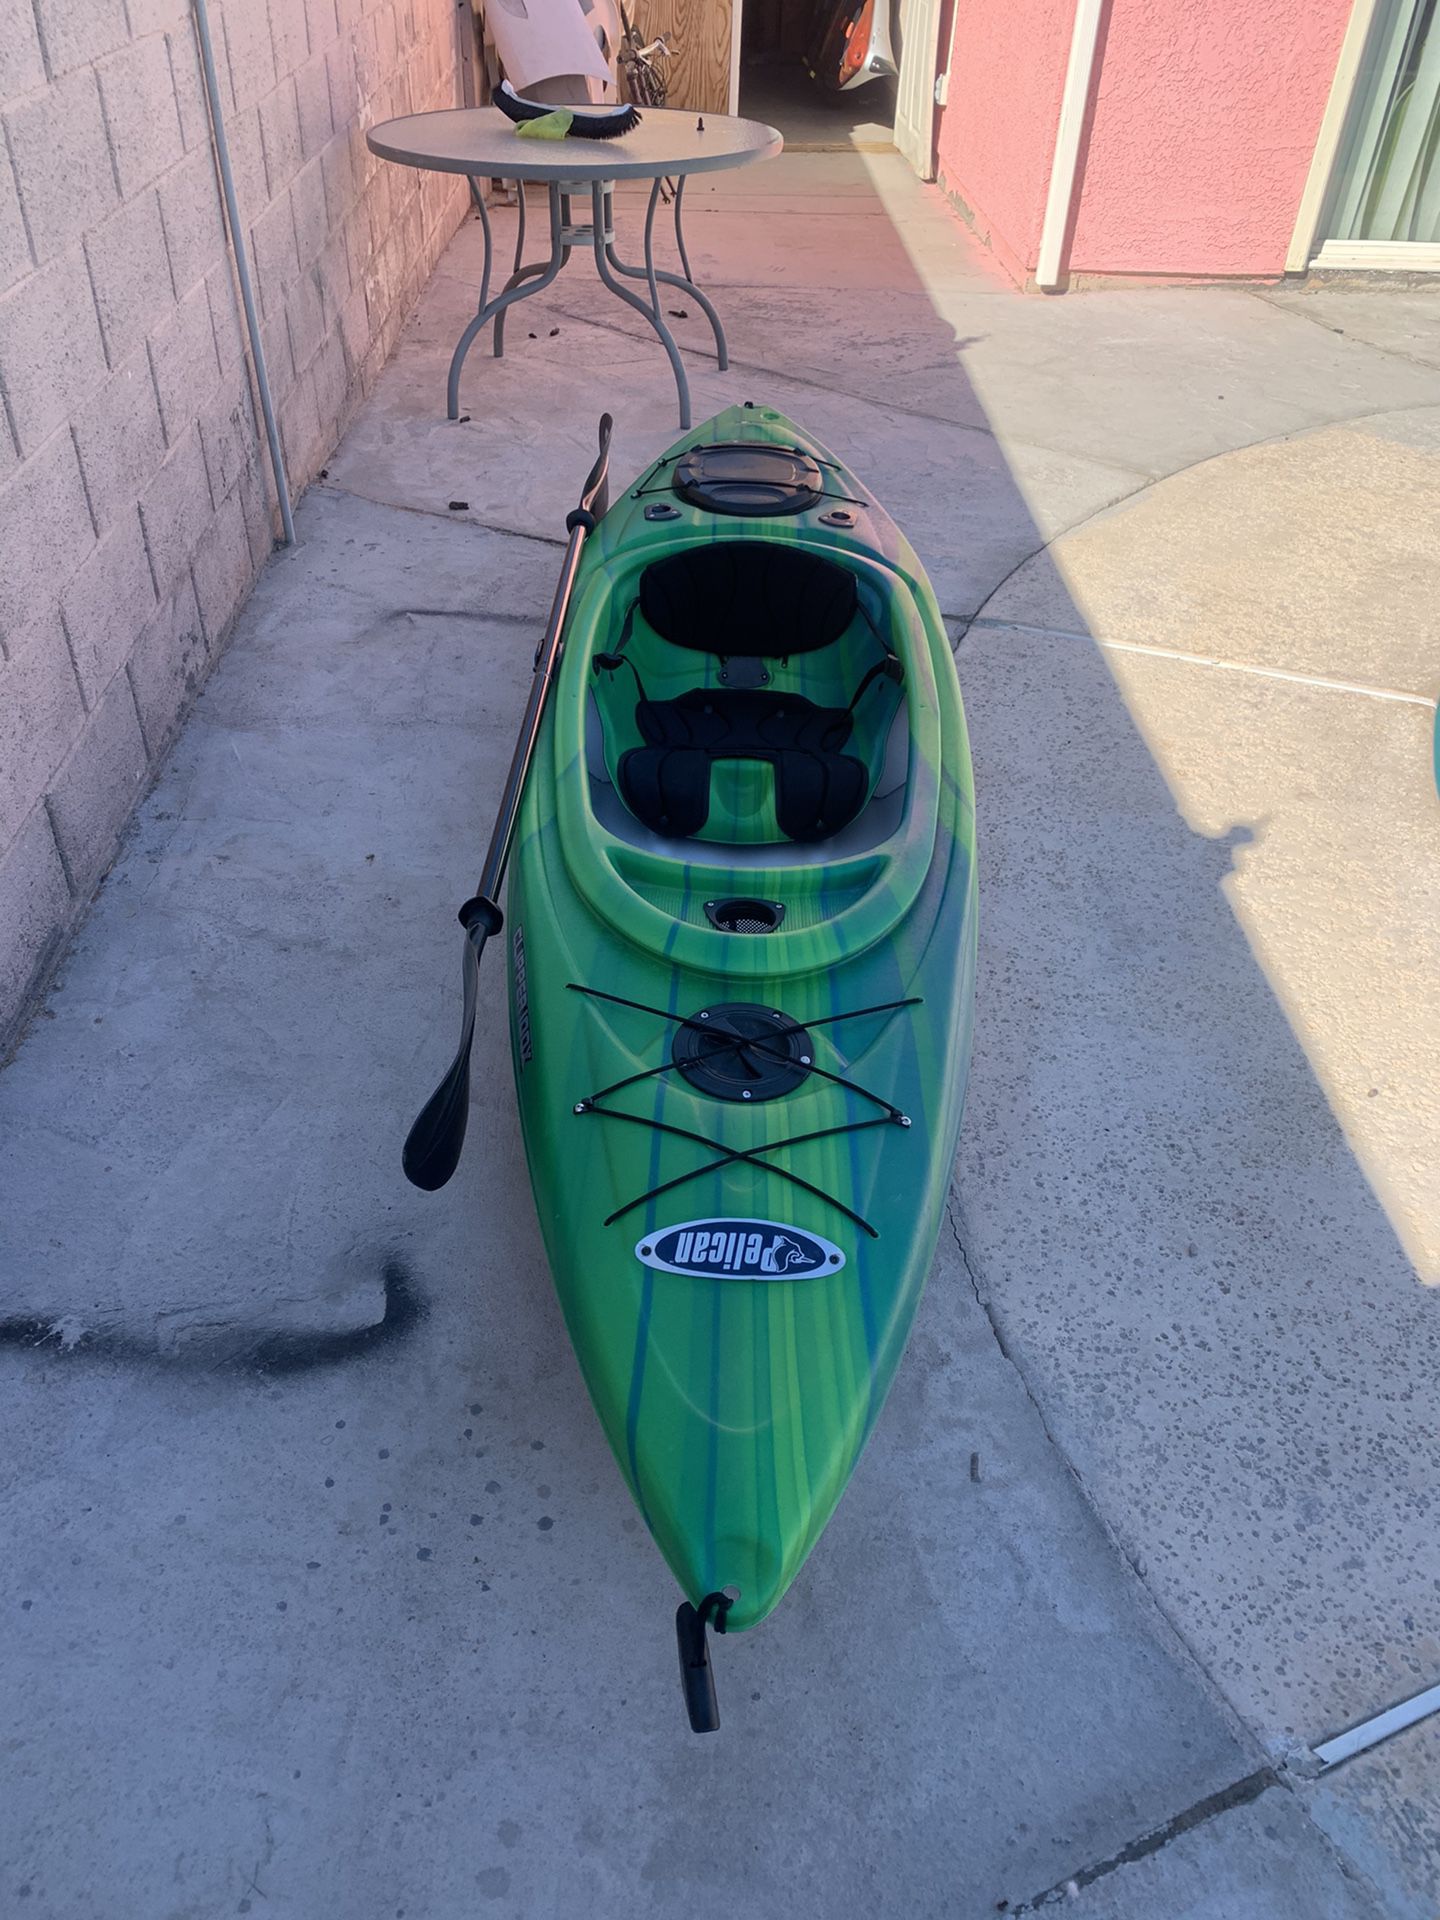 Pelican kayak clippper100x with paddle and all accessories ( like new )